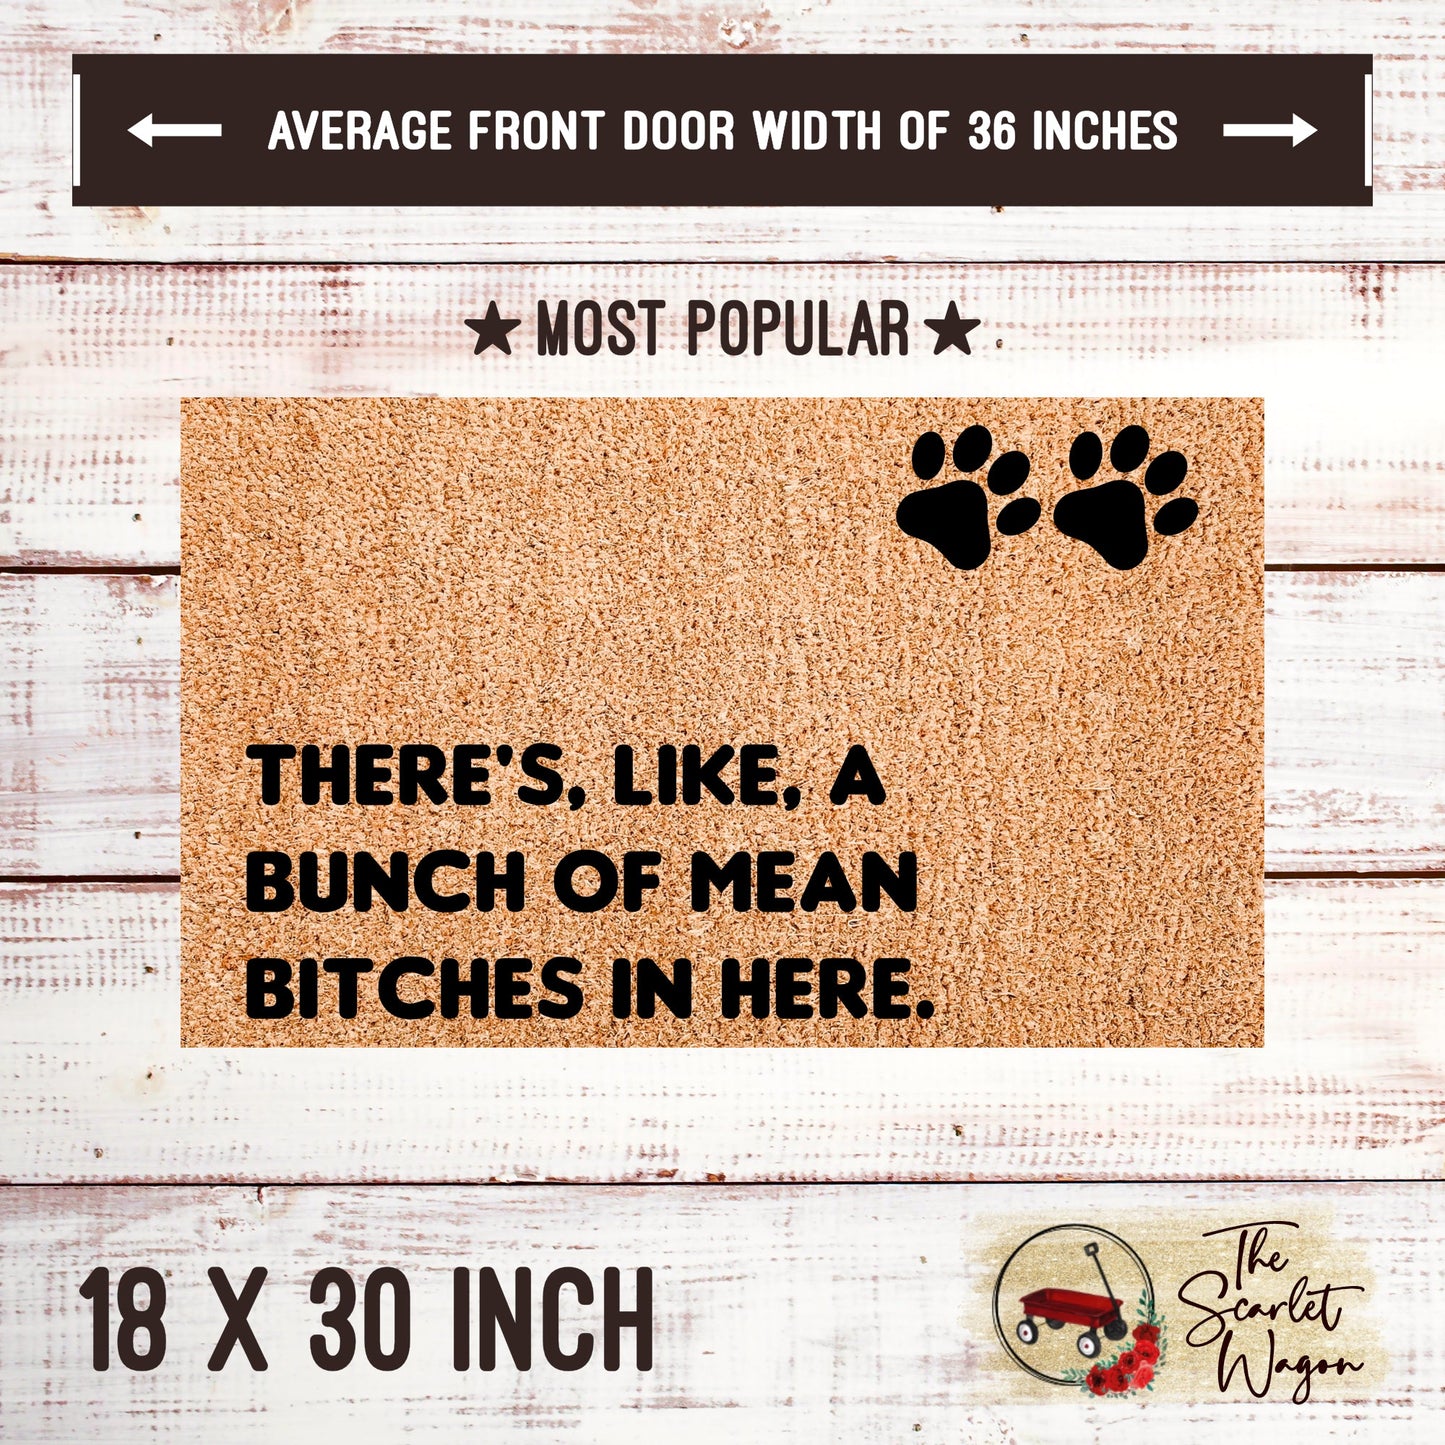 Bunch of Mean Bitches in Here Door Mats teelaunch 18x30 Inches (Free Shipping) 